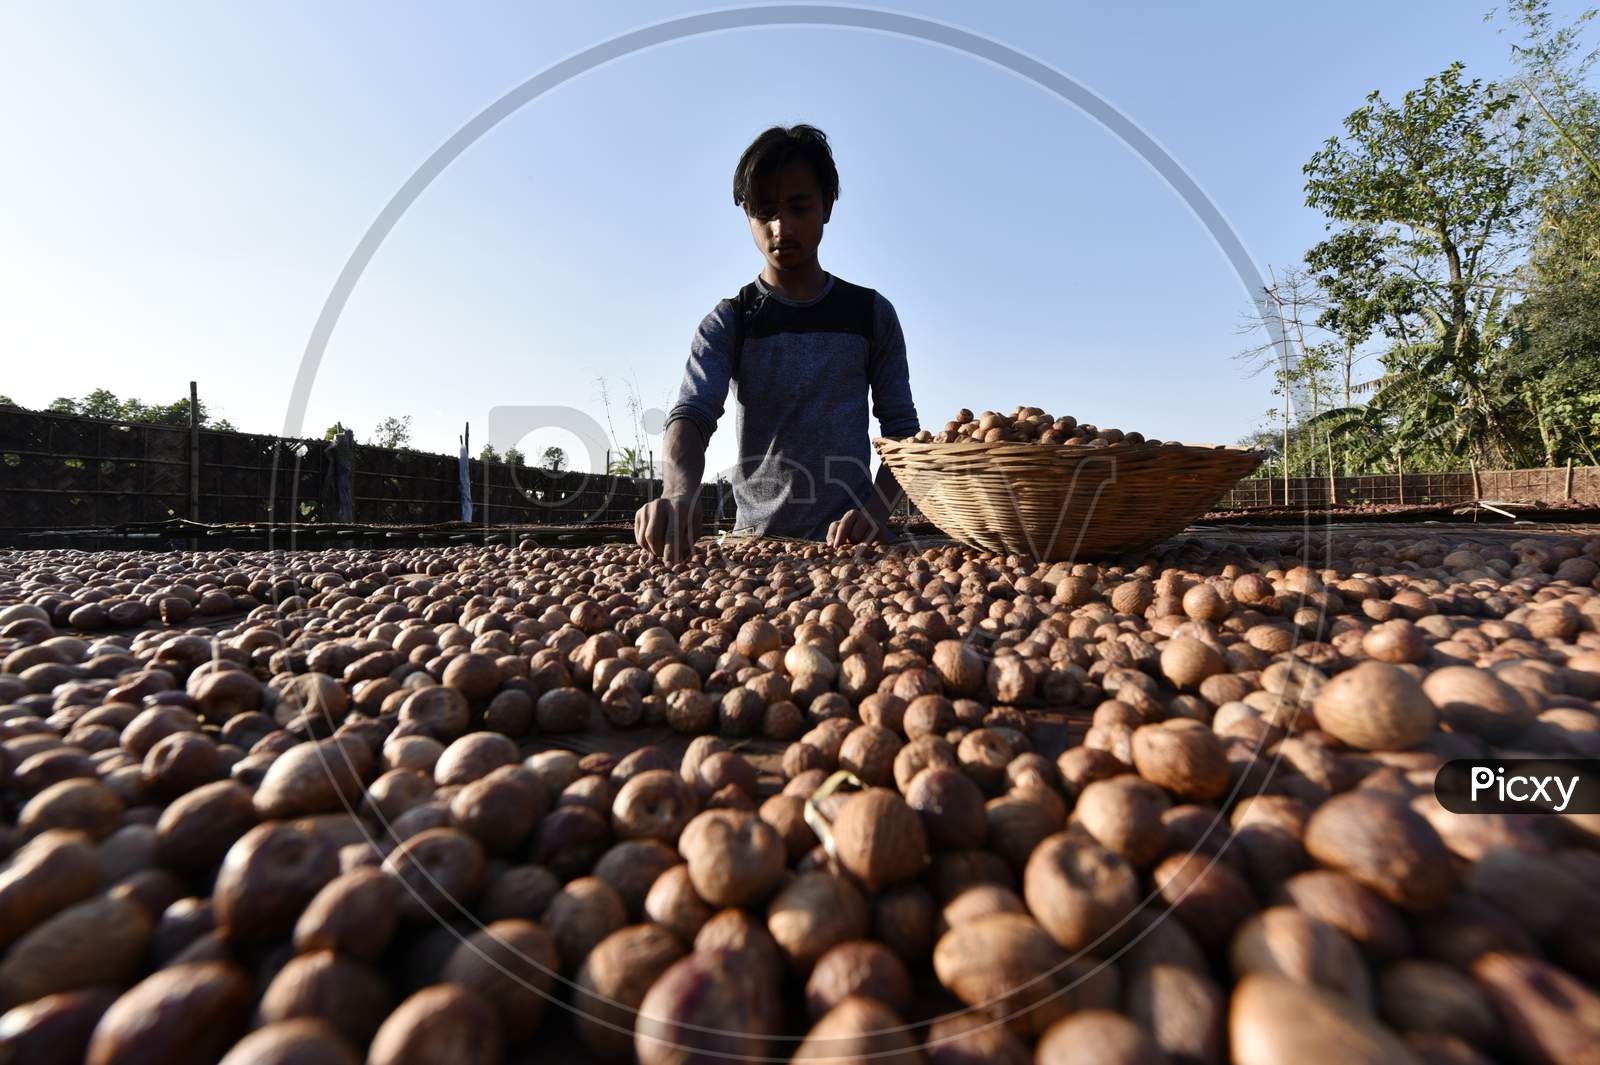 Man Sorts Dried Areca Nuts, Also Known As Betel Nuts Or Supari, At Howly In Barpeta District Of Assam.